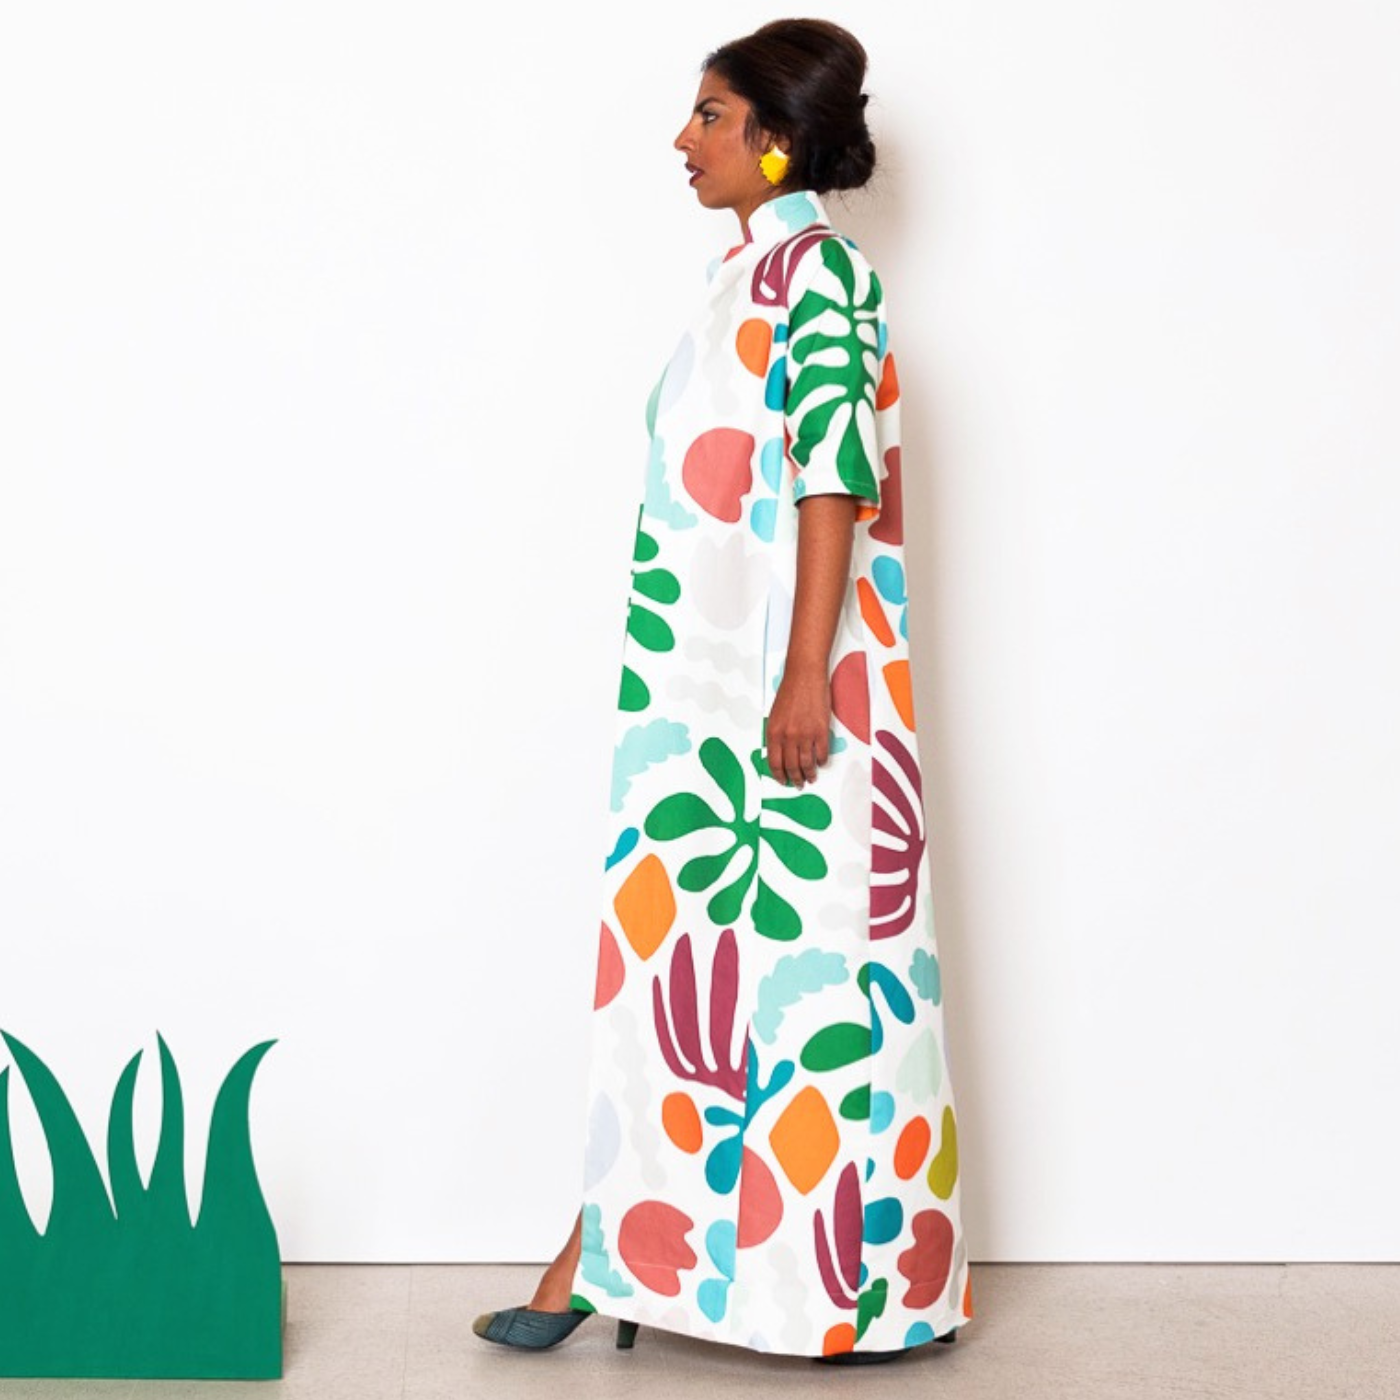 A model stands facing to the left looking straight ahead off camera and wears a design with a white background featuring bright geometric shapes in green, turquoise, orange and dark red. A white wall is behind the model. A calf-high fake grass prop is to the photo’s left edge.